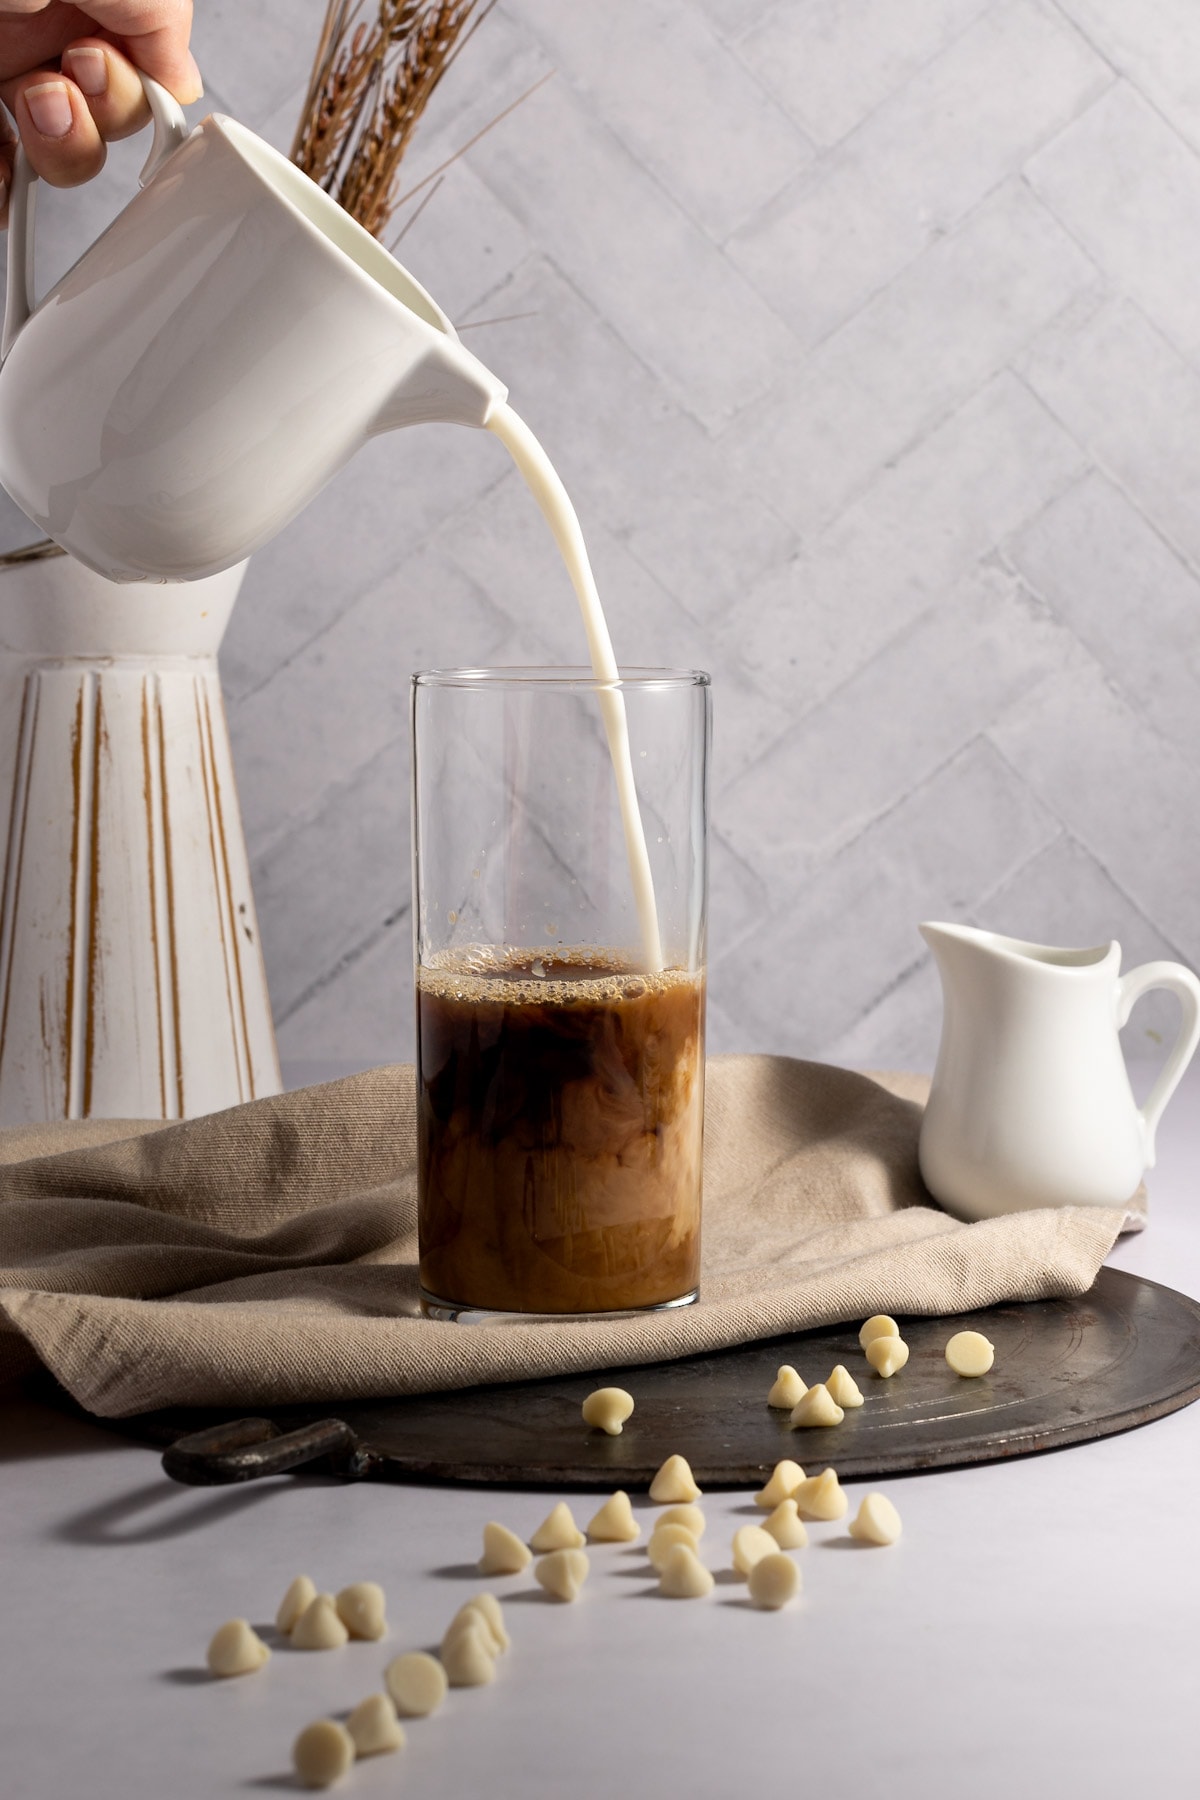 Milk being poured into a tall glass filled with coffee, sitting on a brown napkin, next to scattered white chocolate chips.